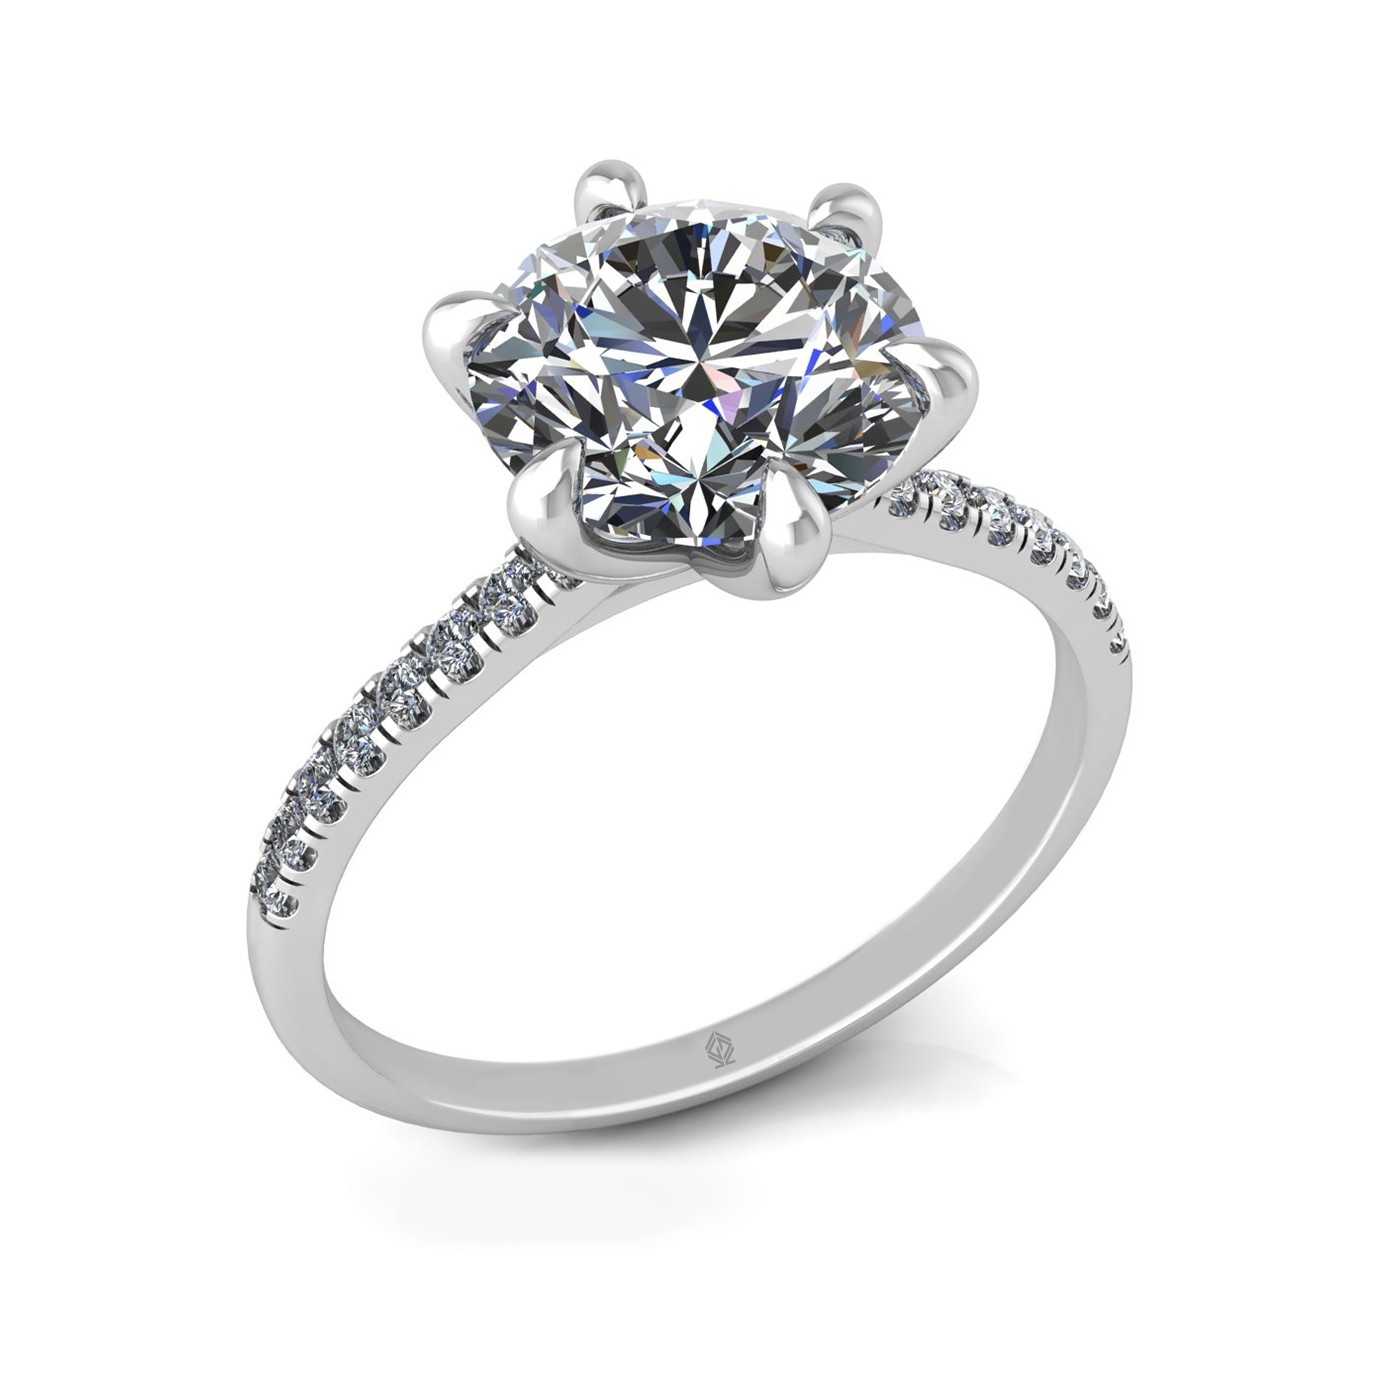 18k white gold 2,50 ct 6 prongs round cut diamond engagement ring with whisper thin pavÉ set band